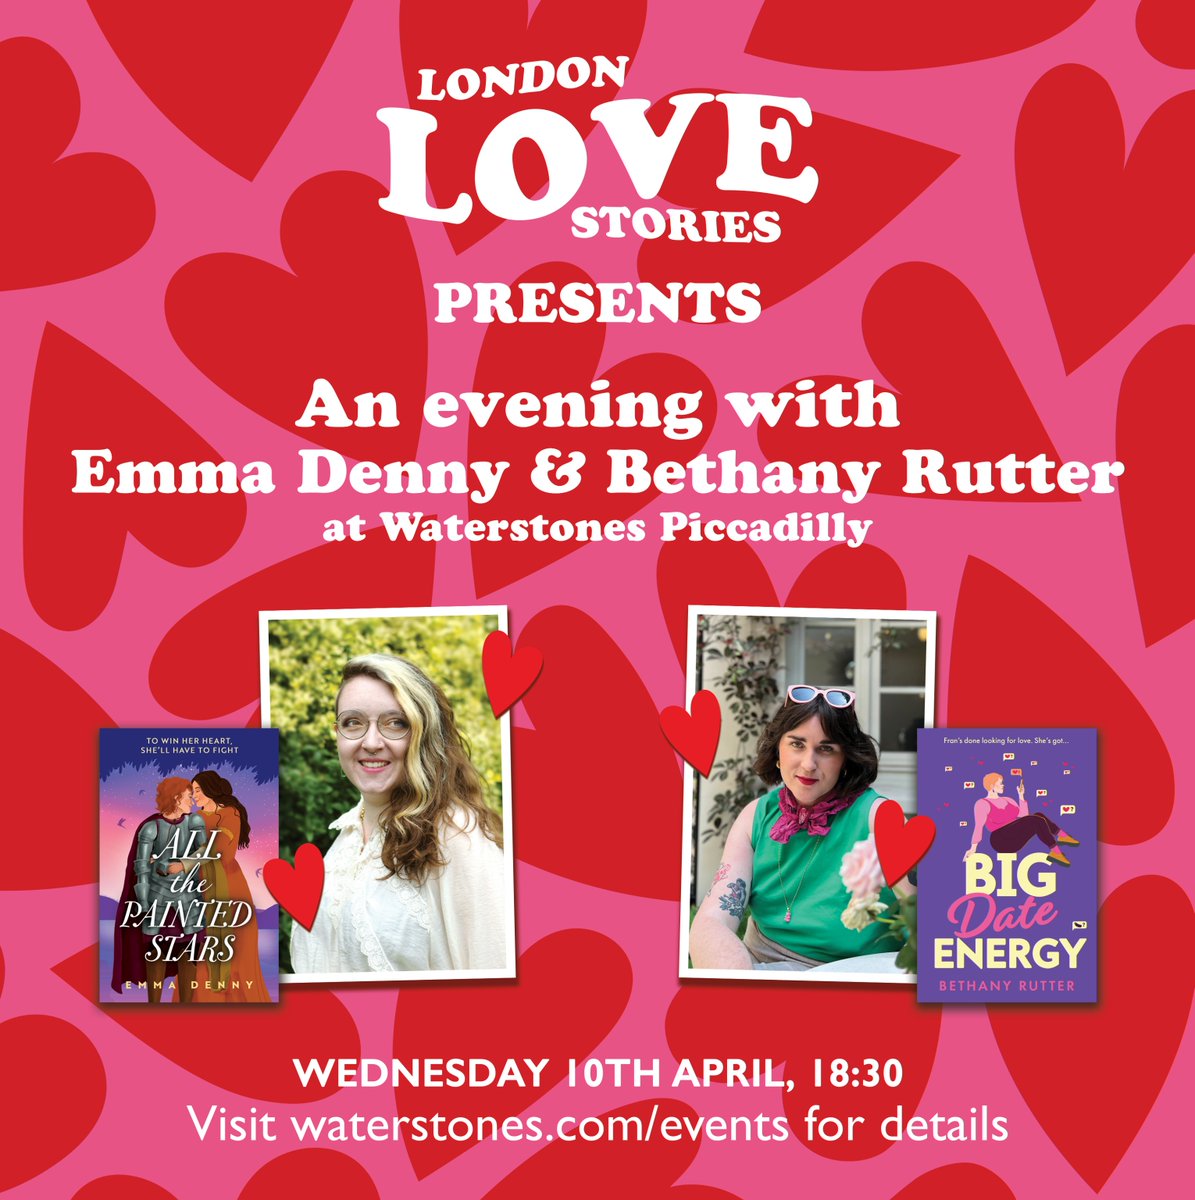 Last chance 👀 Don't miss @Emma_denny_ & Bethany Rutter at their London Love Stories event talking all things love and literature. Taking place at @WaterstonesPicc on April 10th ✨ Book your tickets: ow.ly/GEyA50QQcIr